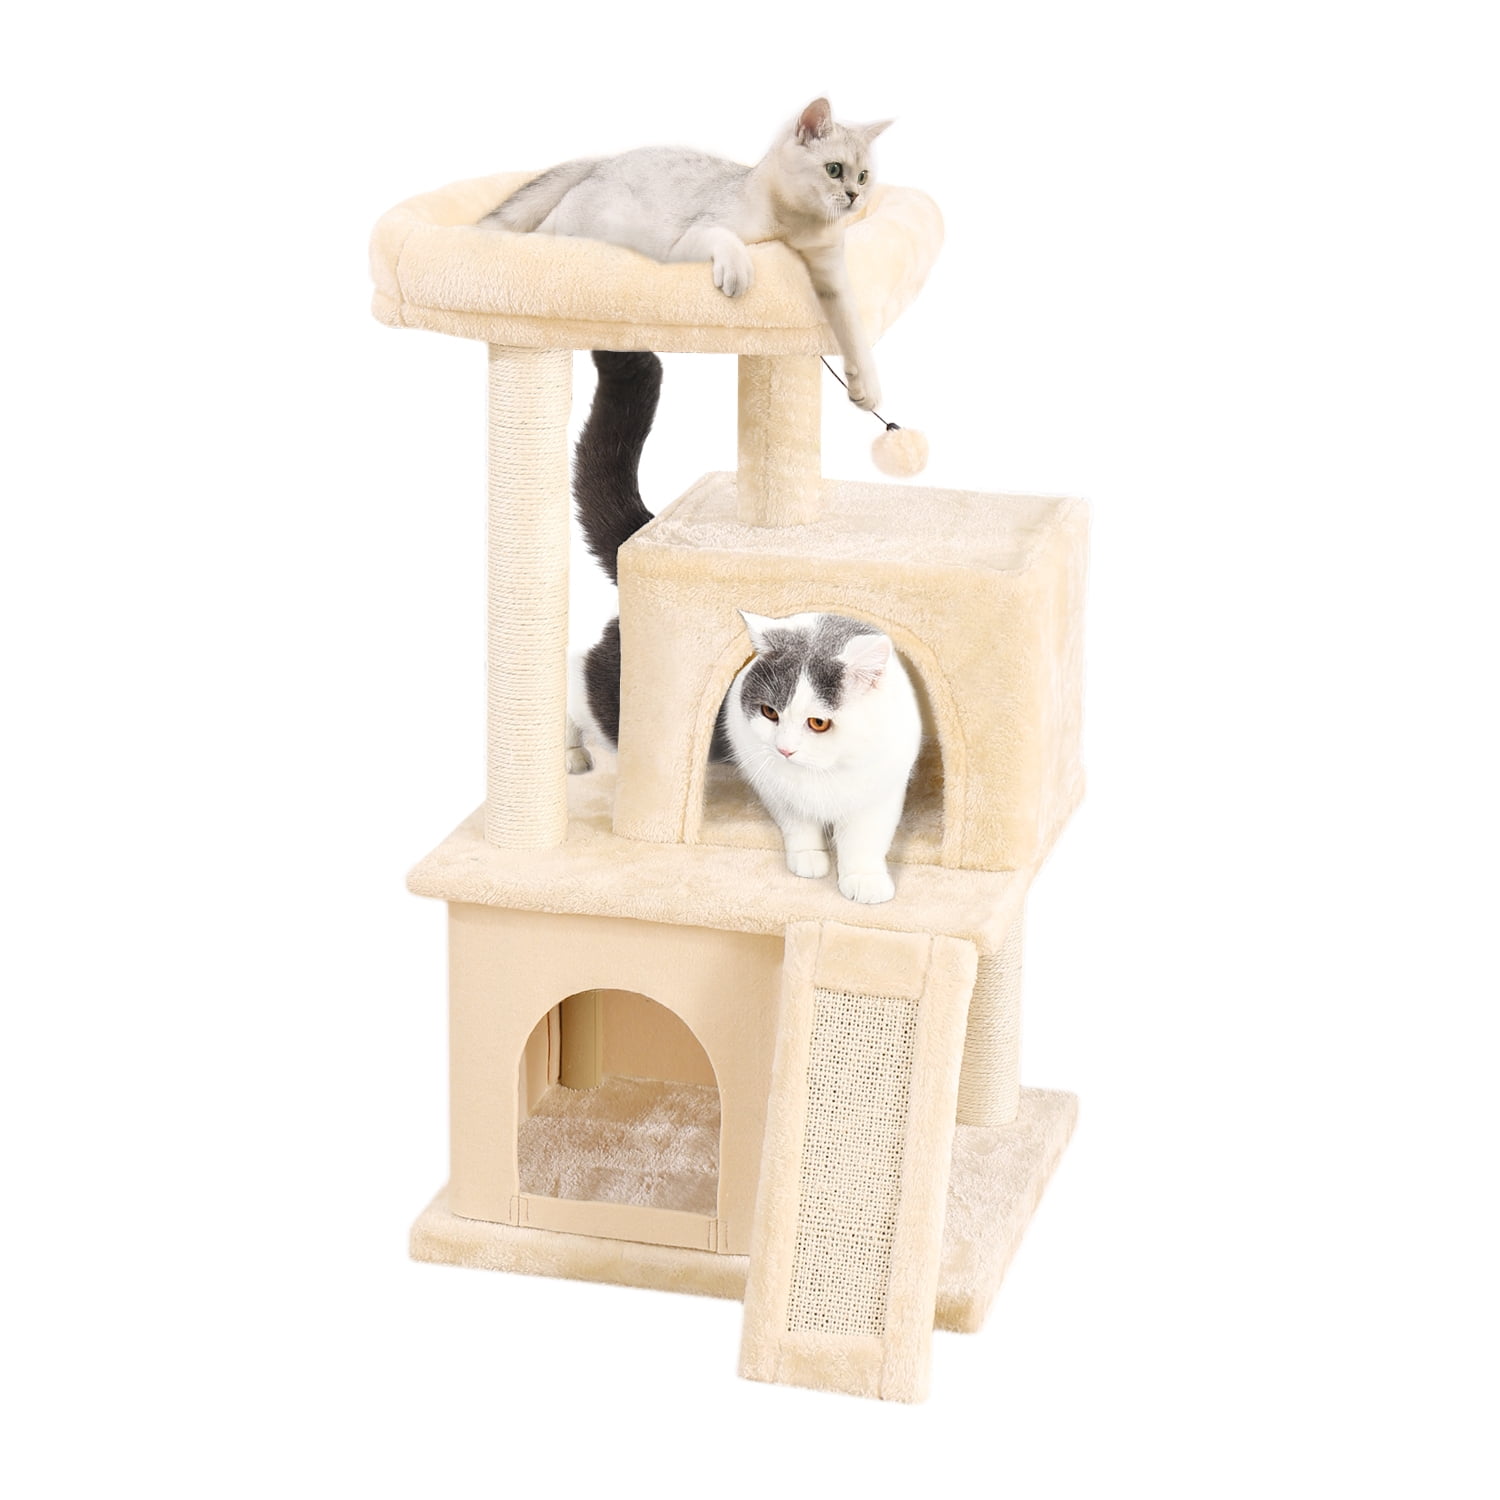 Cat Cave Cat Condo LIVINGbasics Cat House with Scratcher Pad Cat Play House for Indoor Activity for 1-3 Cats